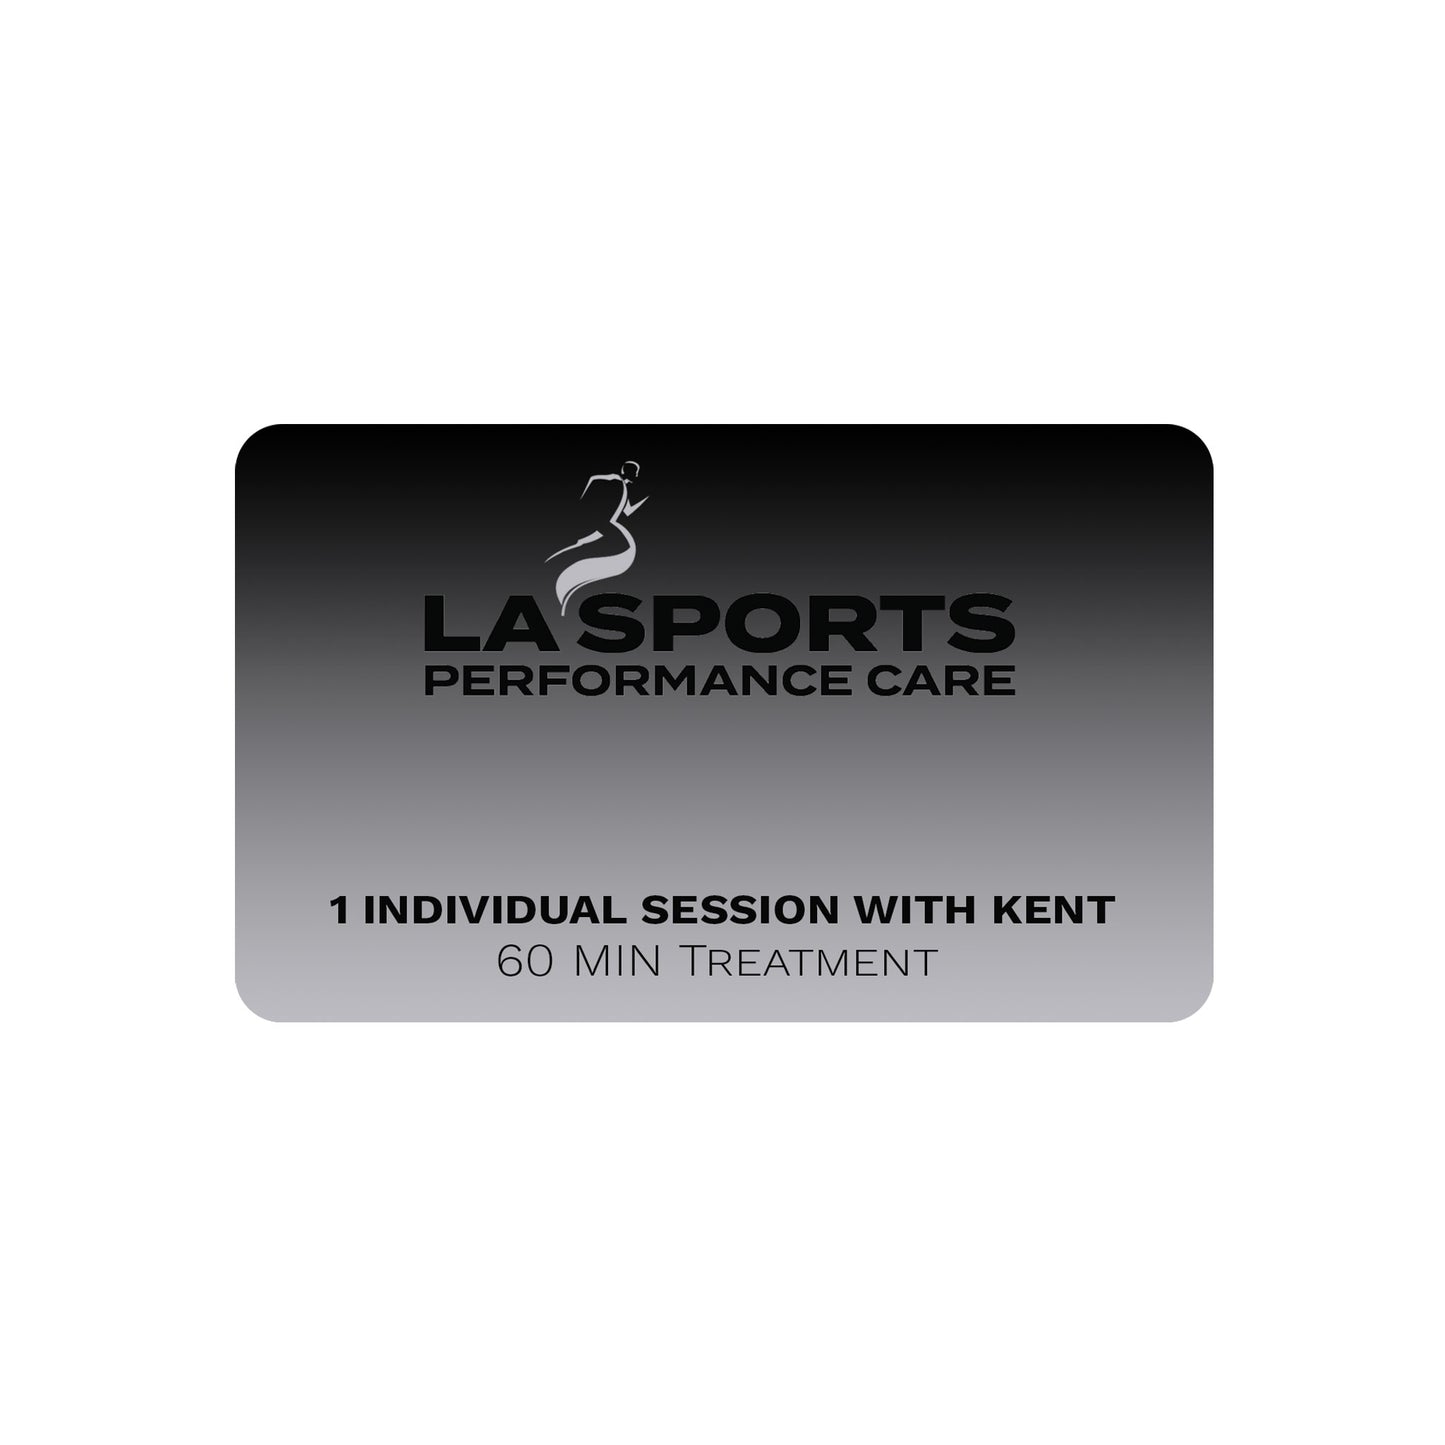 1 INDIVIDUAL SESSION WITH KENT 60 MIN